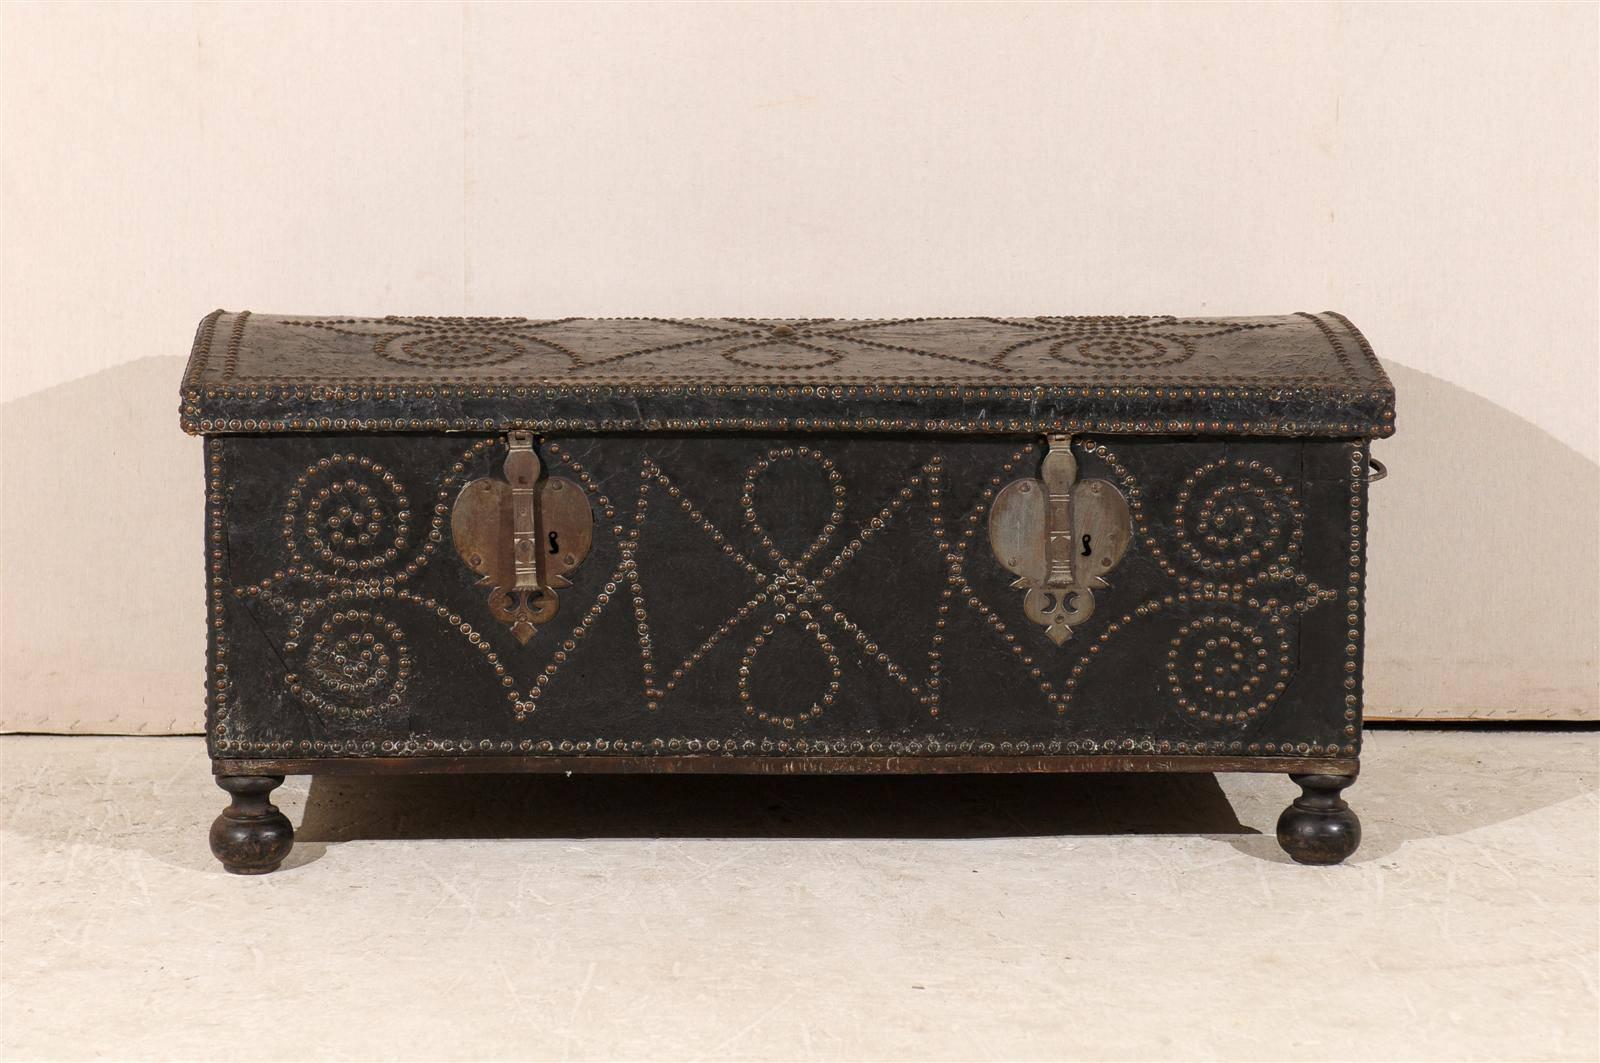 A Spanish 19th century trunk made of leather embossed with brass nailheads featuring geometrical patterns and heart shapes on the sides surrounding the handles. Bun feet.